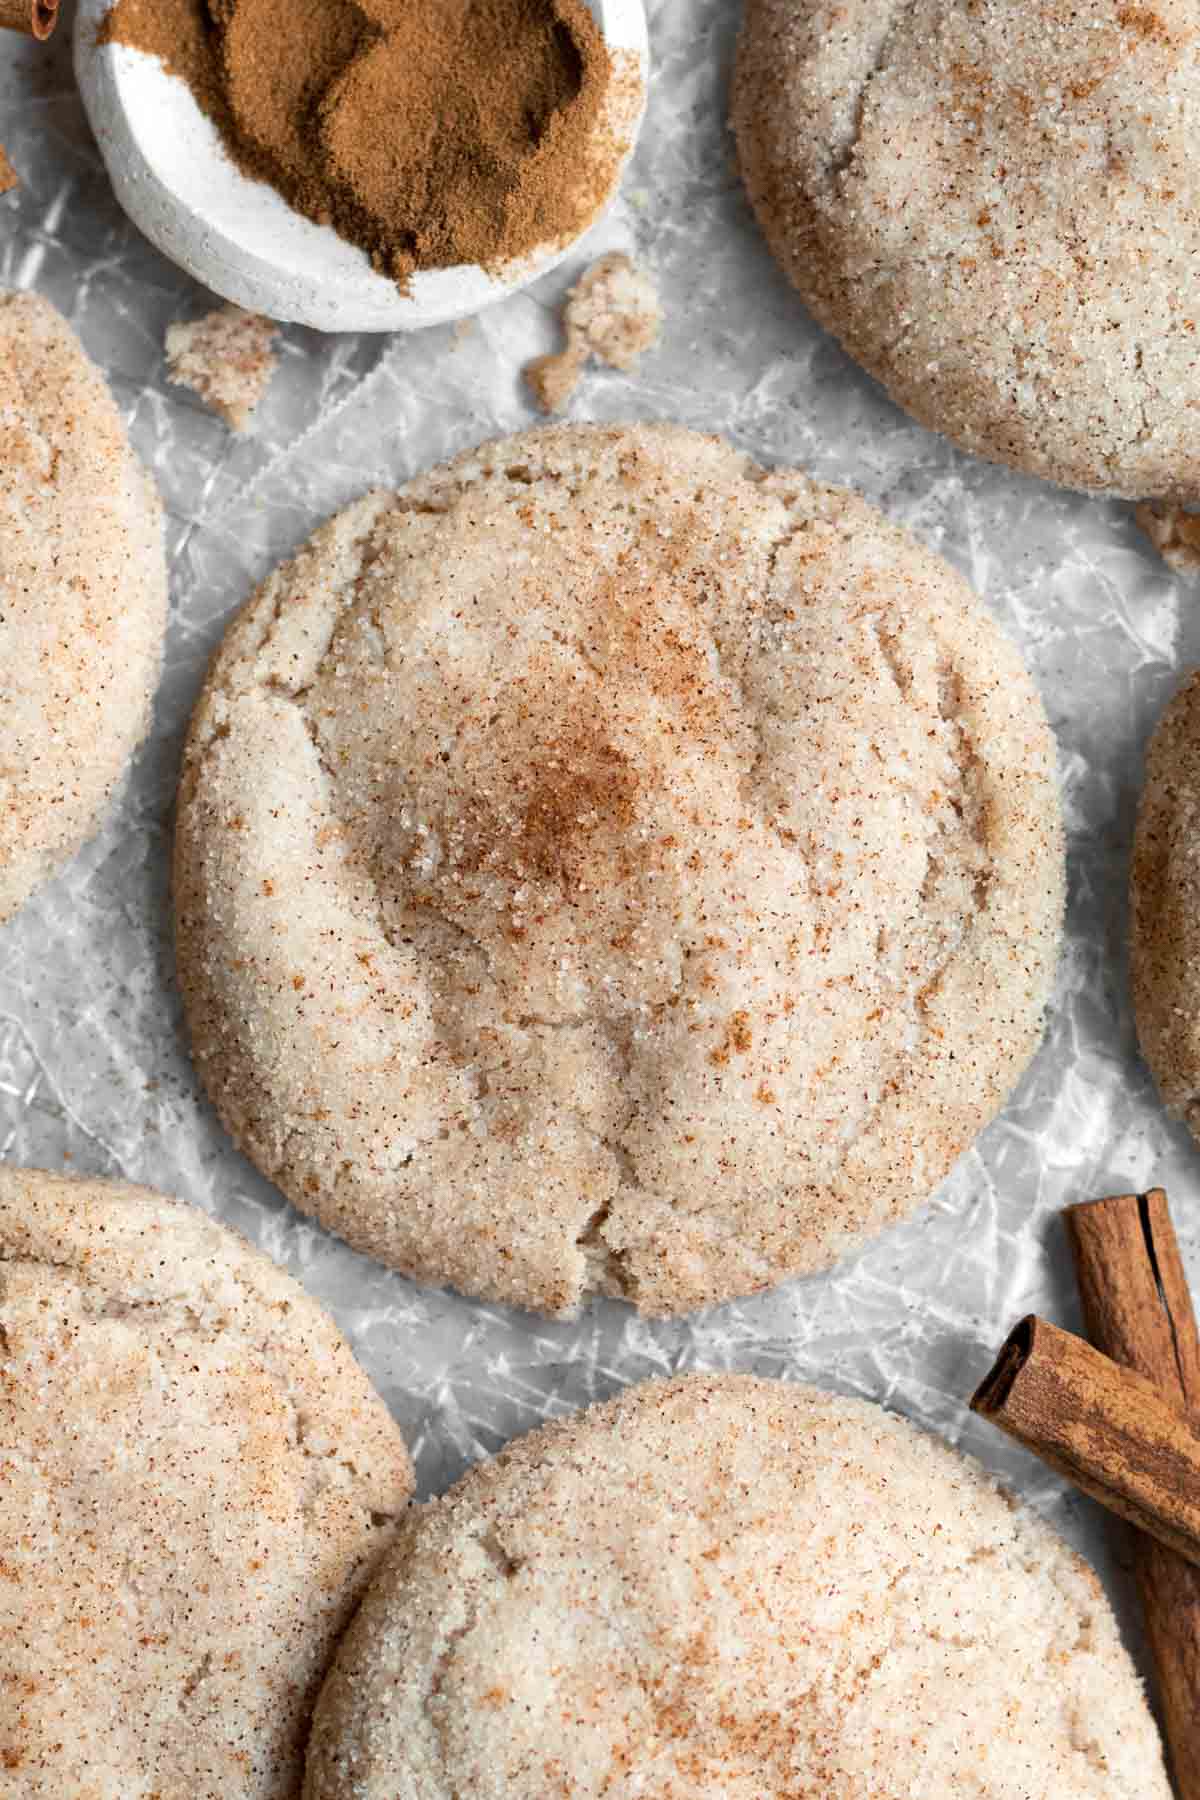 A flavorful brown gradient of cinnamon sugar cascades atop these delicious Gluten Free Snickerdoodle Cookies.